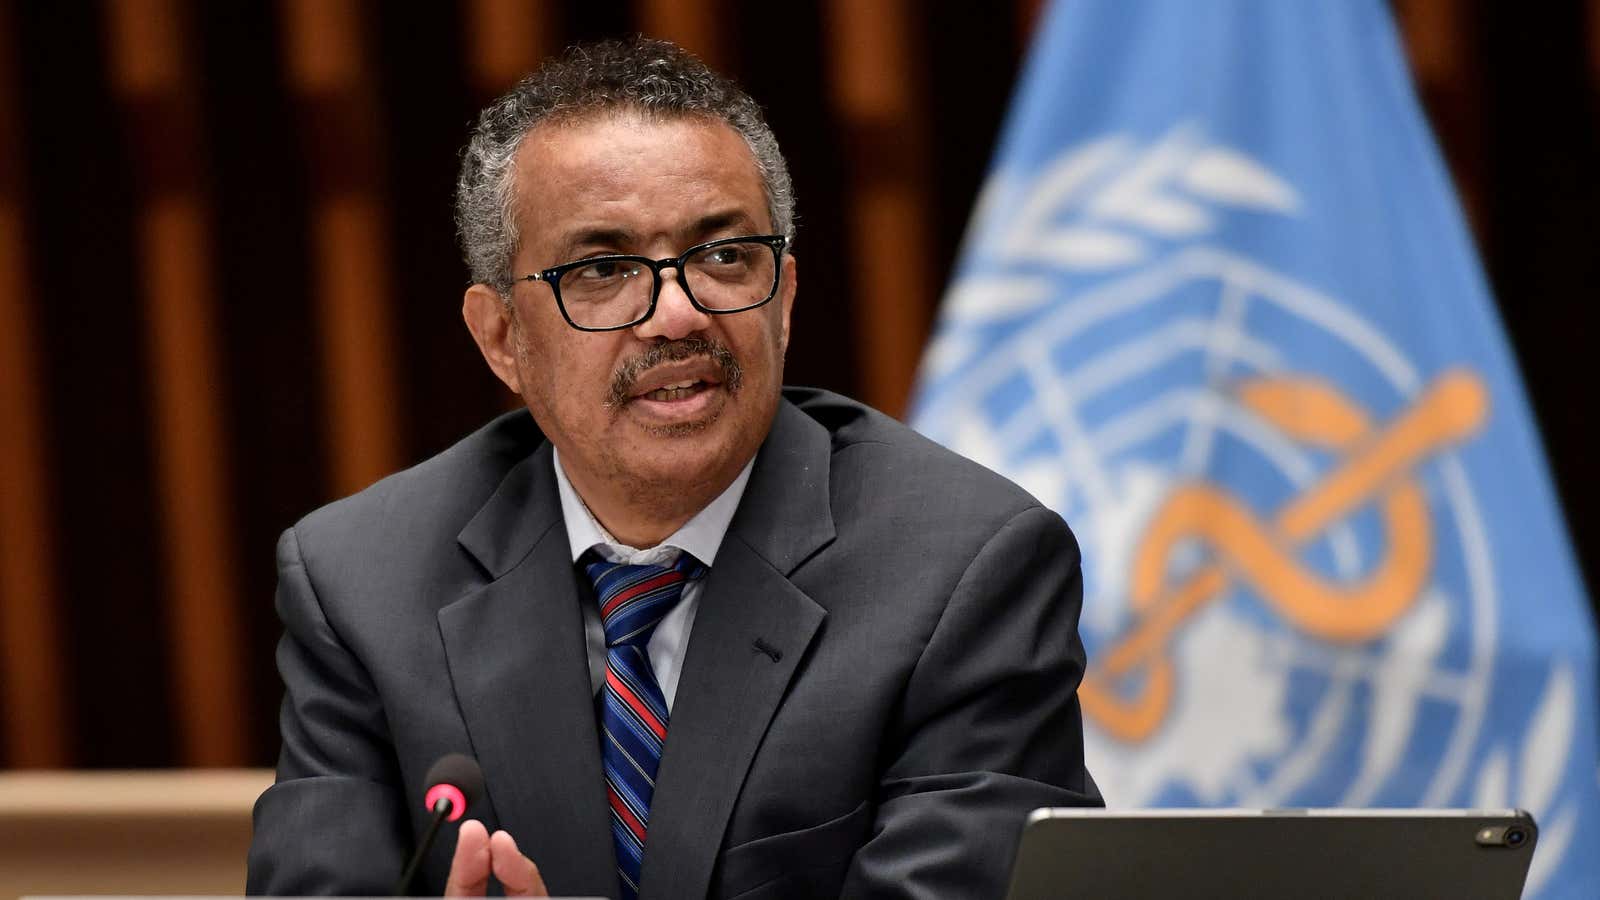 Tedros Adhanom Ghebreyesus, the director-general of the World Health Organization, has said that he’s looking forward to working with president-elect Joe Biden.